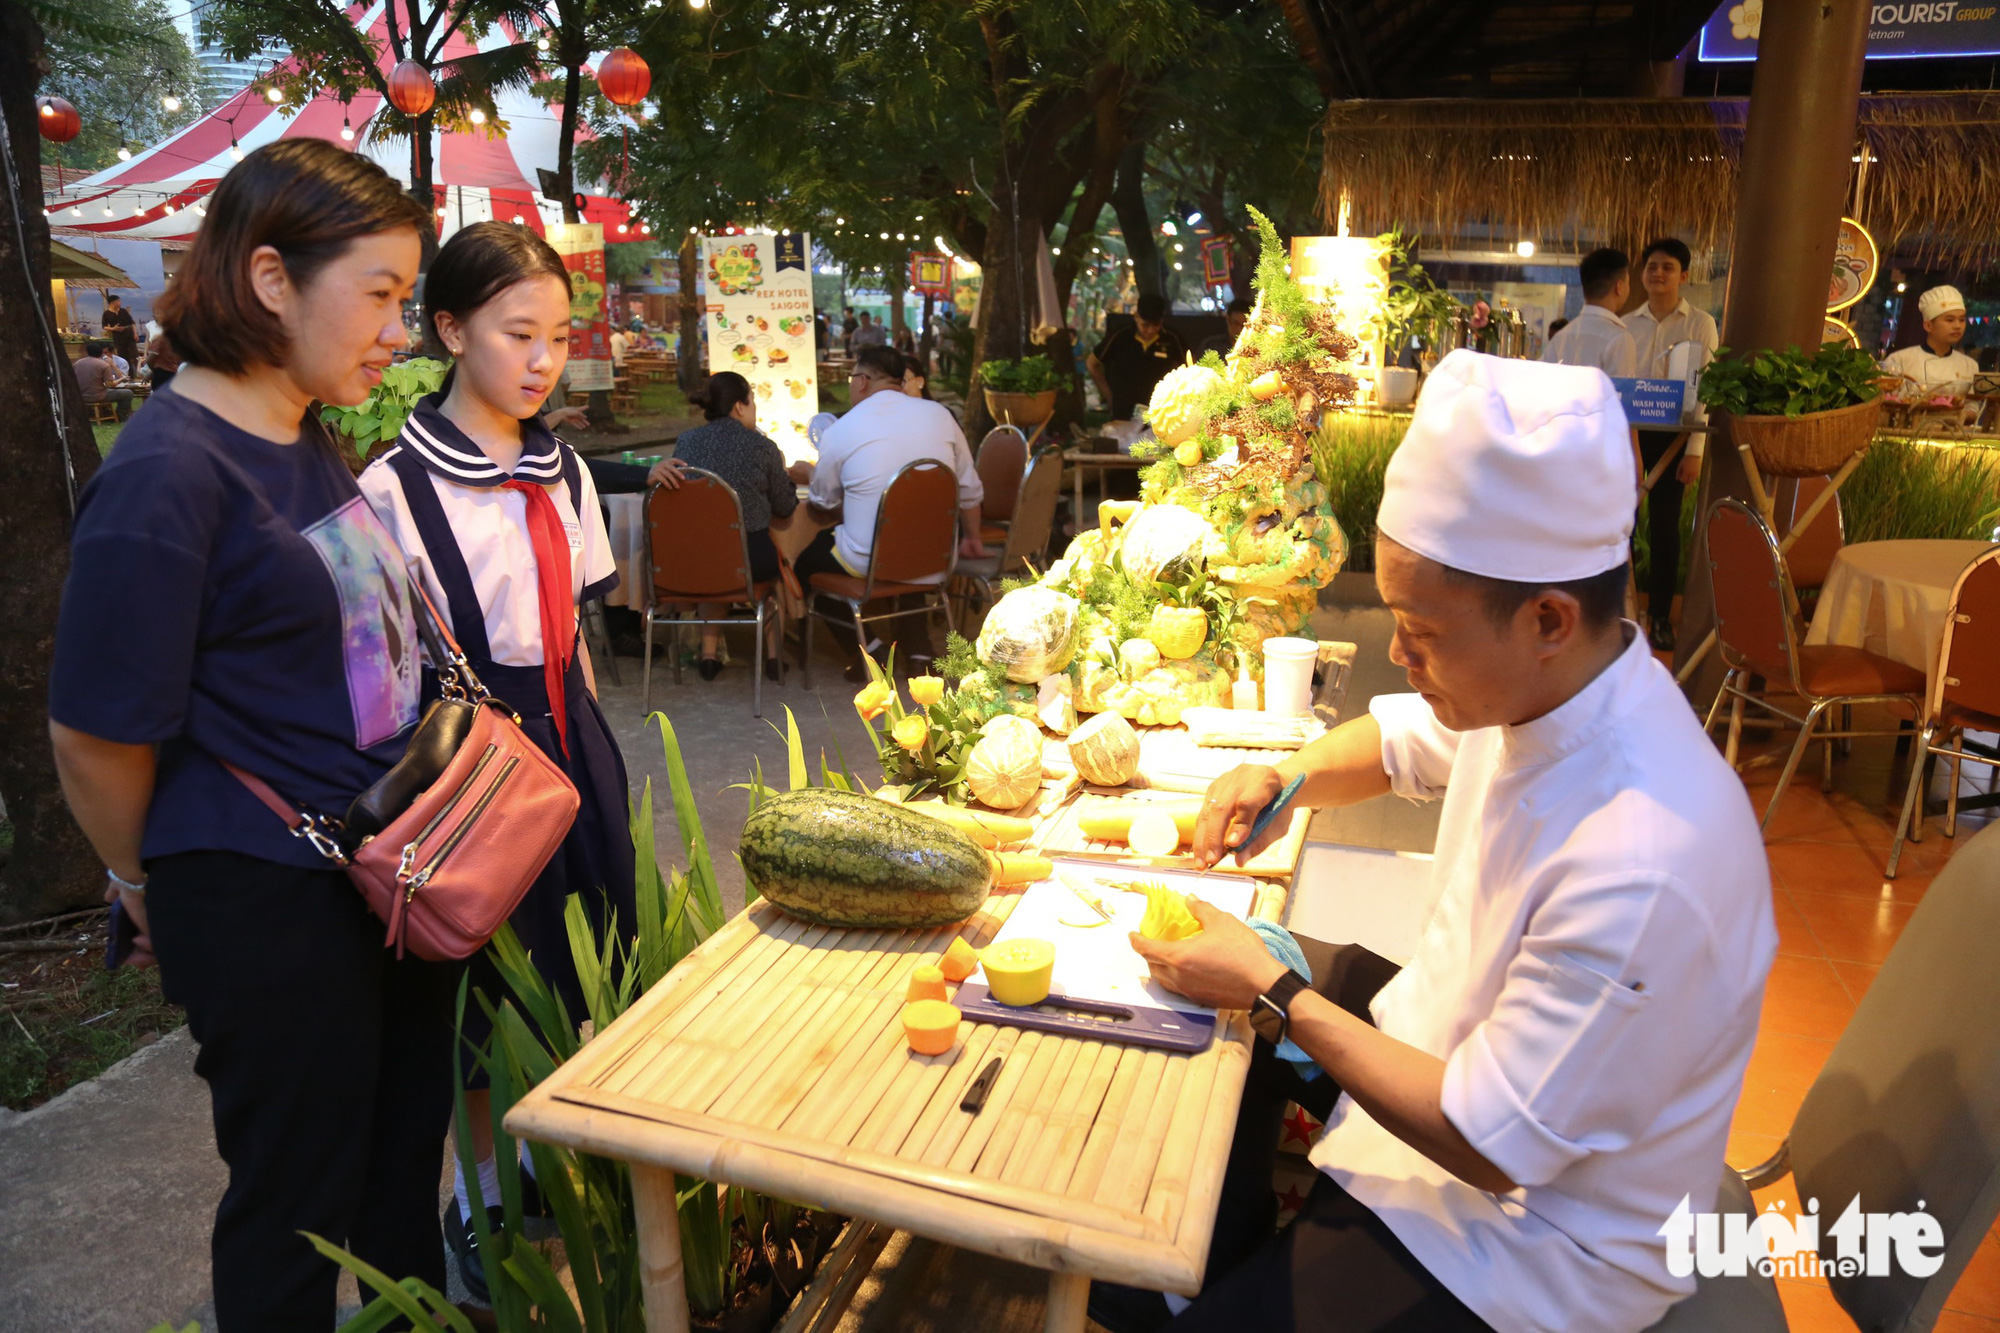 Chef Vo Truong Giang introduces visitors to the art of vegetable carving at the opening of the Saigontourist Group Food and Culture Festival 2023 at Van Thanh Tourist Site in Binh Thanh District, Ho Chi Minh City on April 20, 2023. Photo: Phuong Quyen / Tuoi Tre